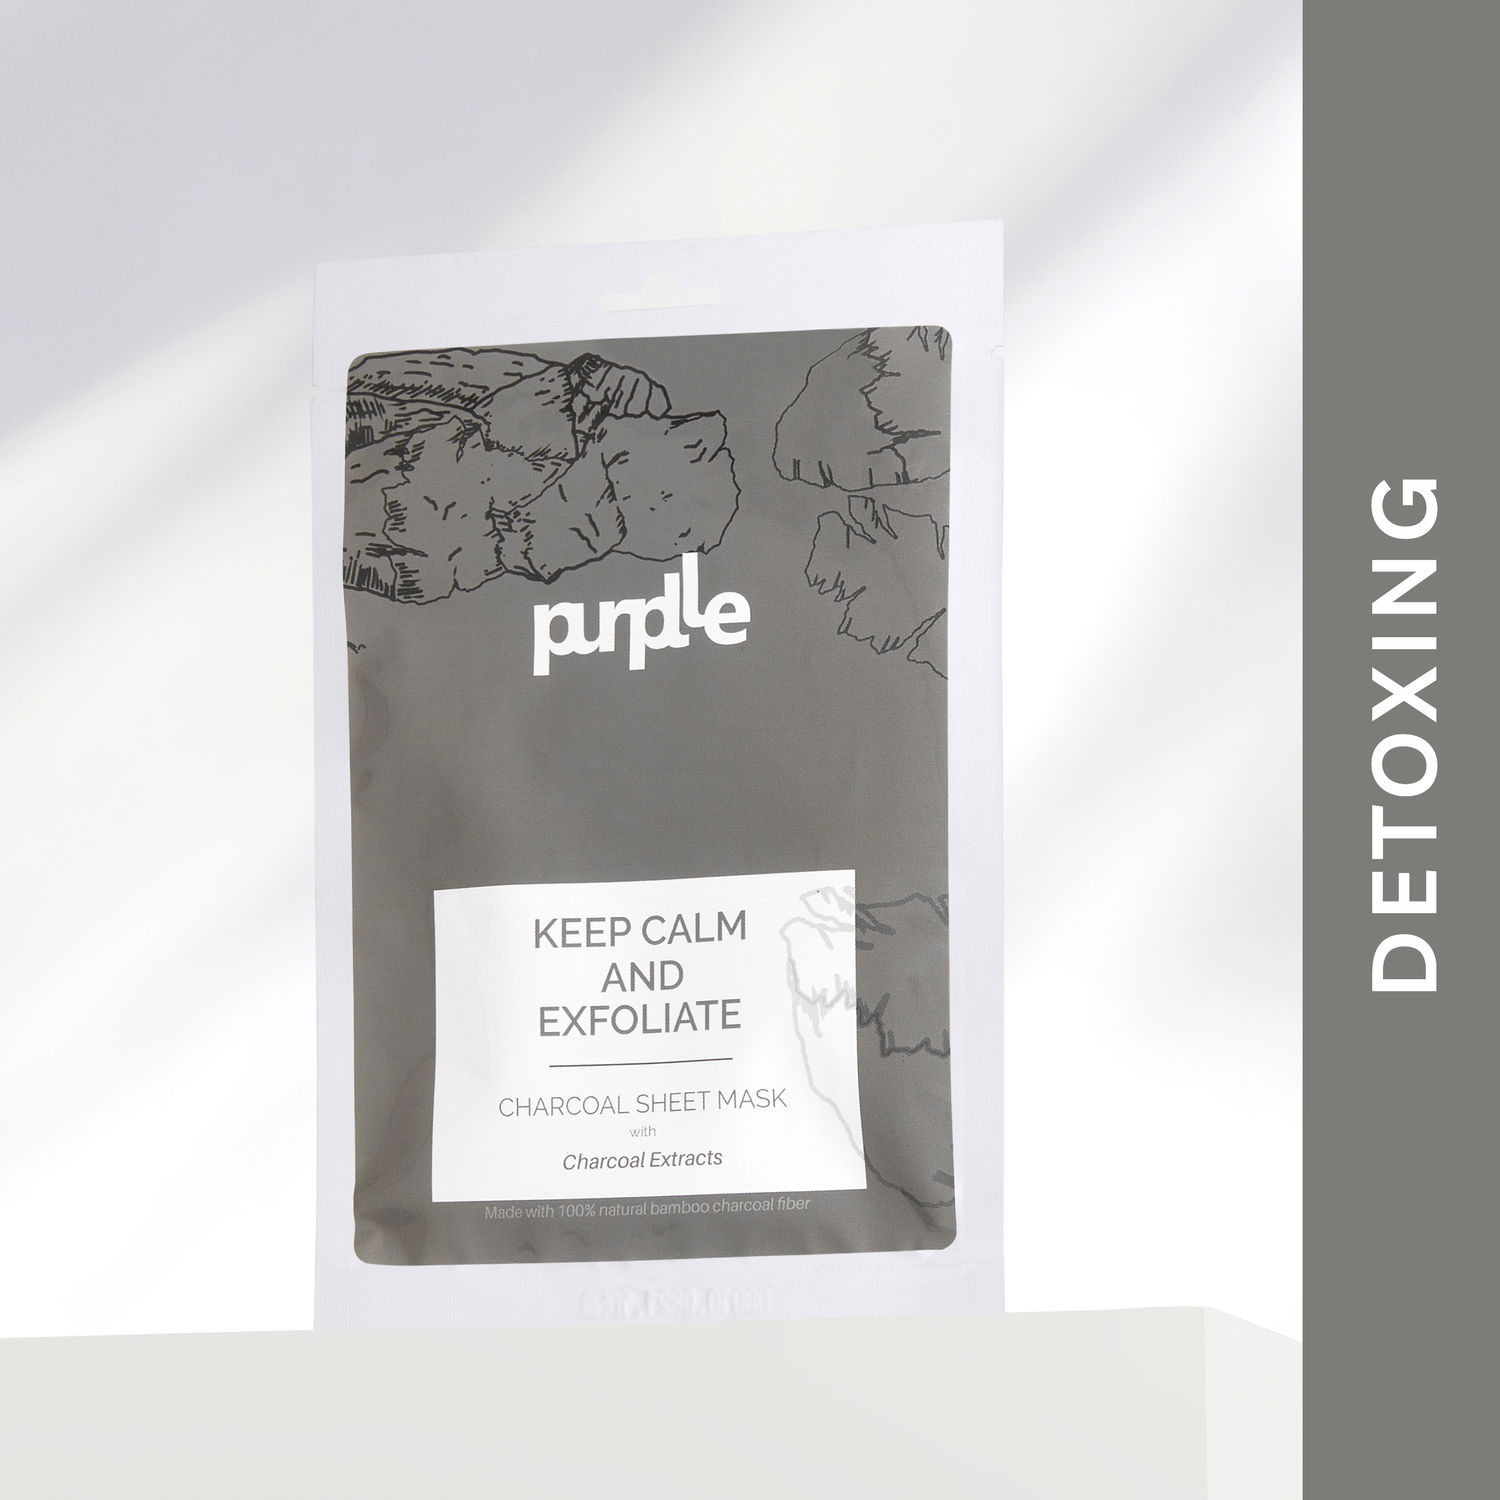 Buy Purplle Exfoliating Charcoal Sheet Mask with Charcoal Extracts | All Skin Types | Brightening | Purifying | Detoxifying | Pore Minimizing (20 ml) - Purplle